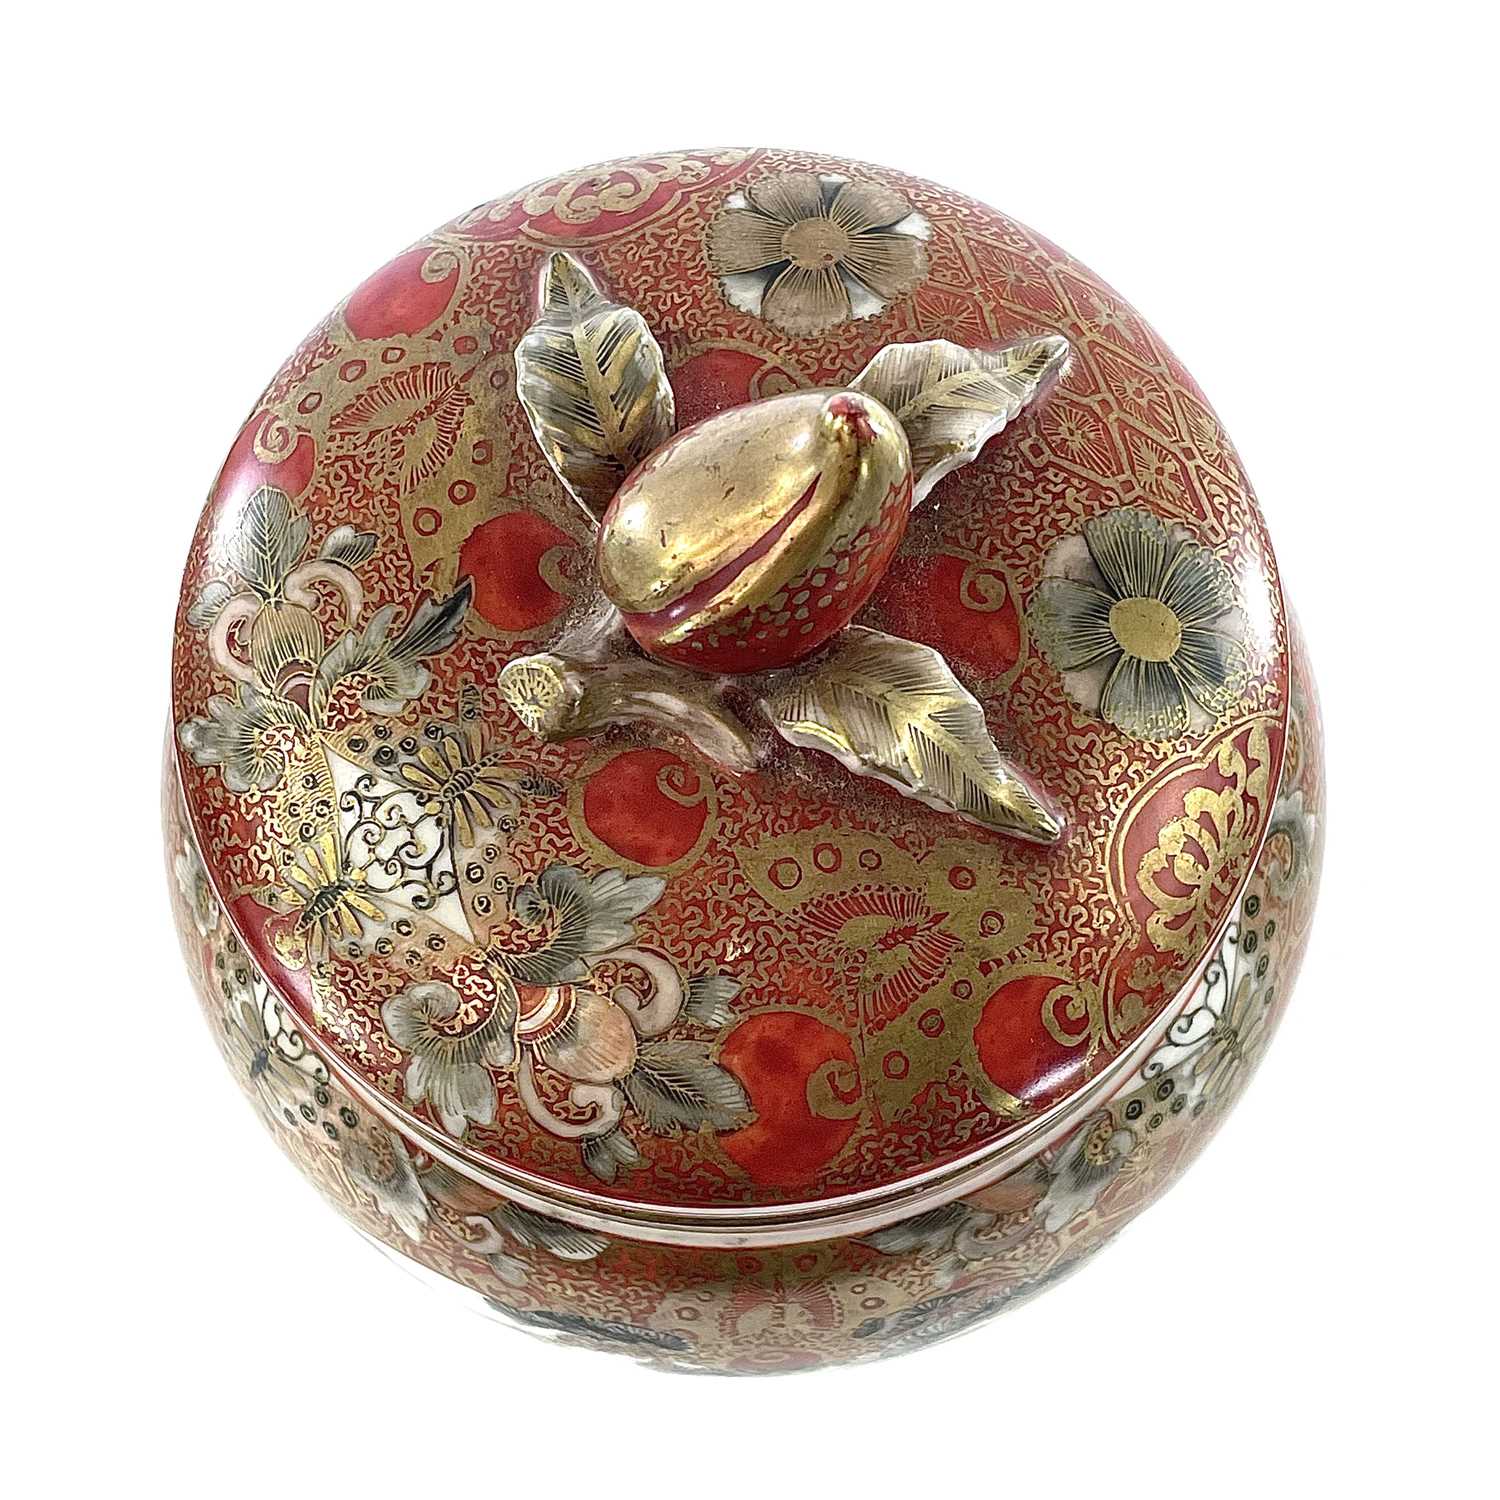 A Japanese kutani porcelain jar and cover, 19th century, signed, with three cartouches filled with - Image 7 of 10